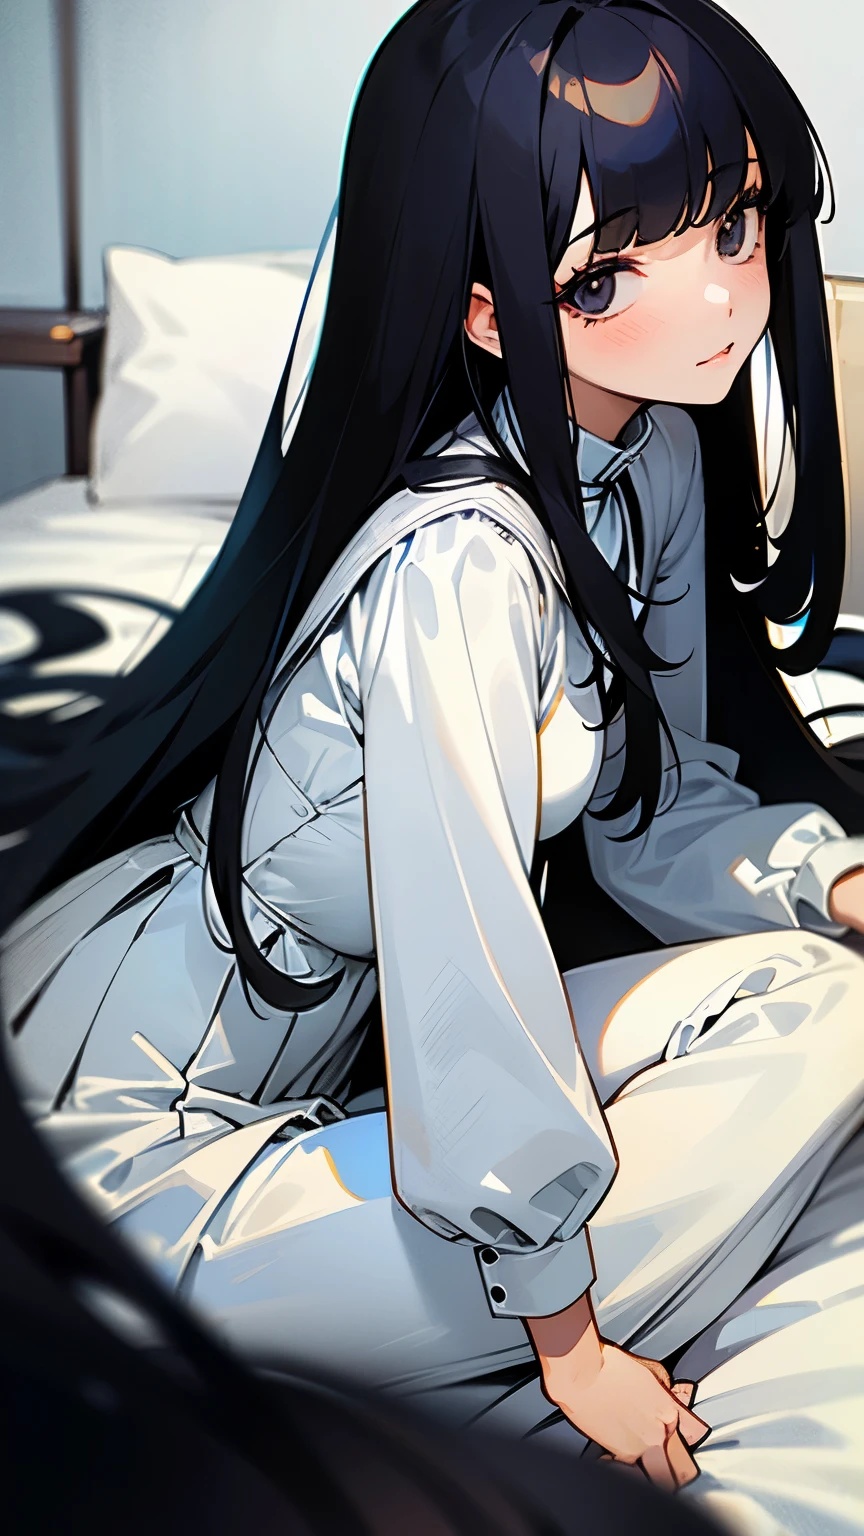 ((best quality)),((masterpiece)), 1 girl, long black hair, black eyes, (her bangs covered one of her eyes), white lolita outfit, ((ALL WHITE OUTFIT)), ((straight bangs)), shy, not smiled, dark modern bed room, low light, (half body)